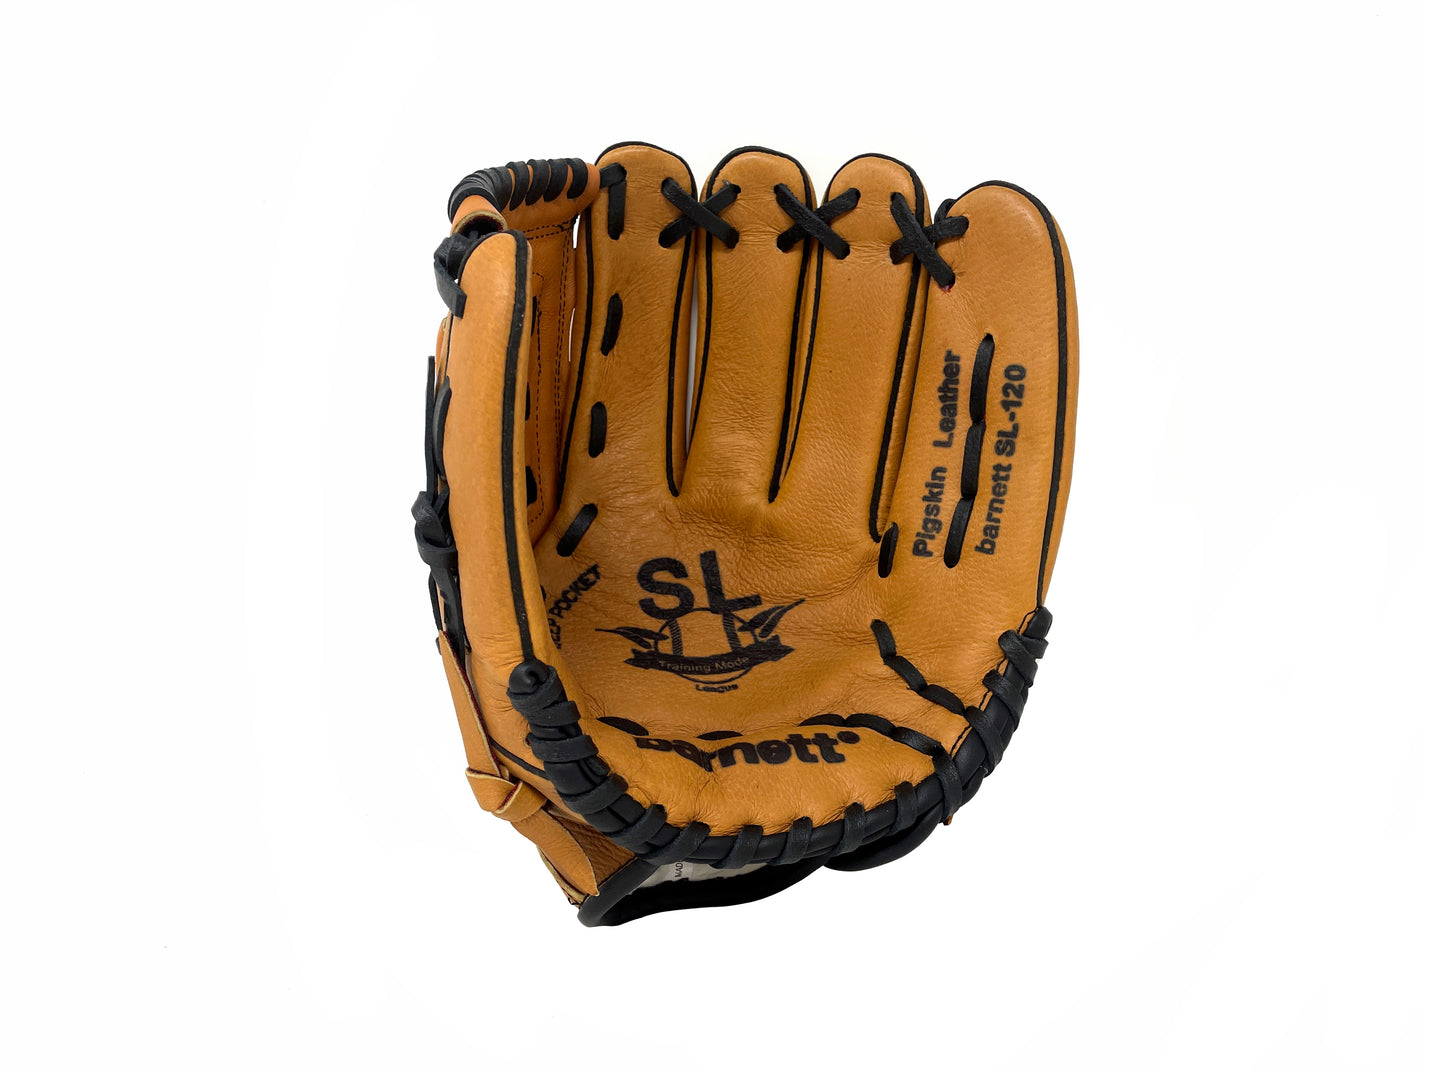 SL-120 Baseball gloves in leather infield/outfield, size 12, brown